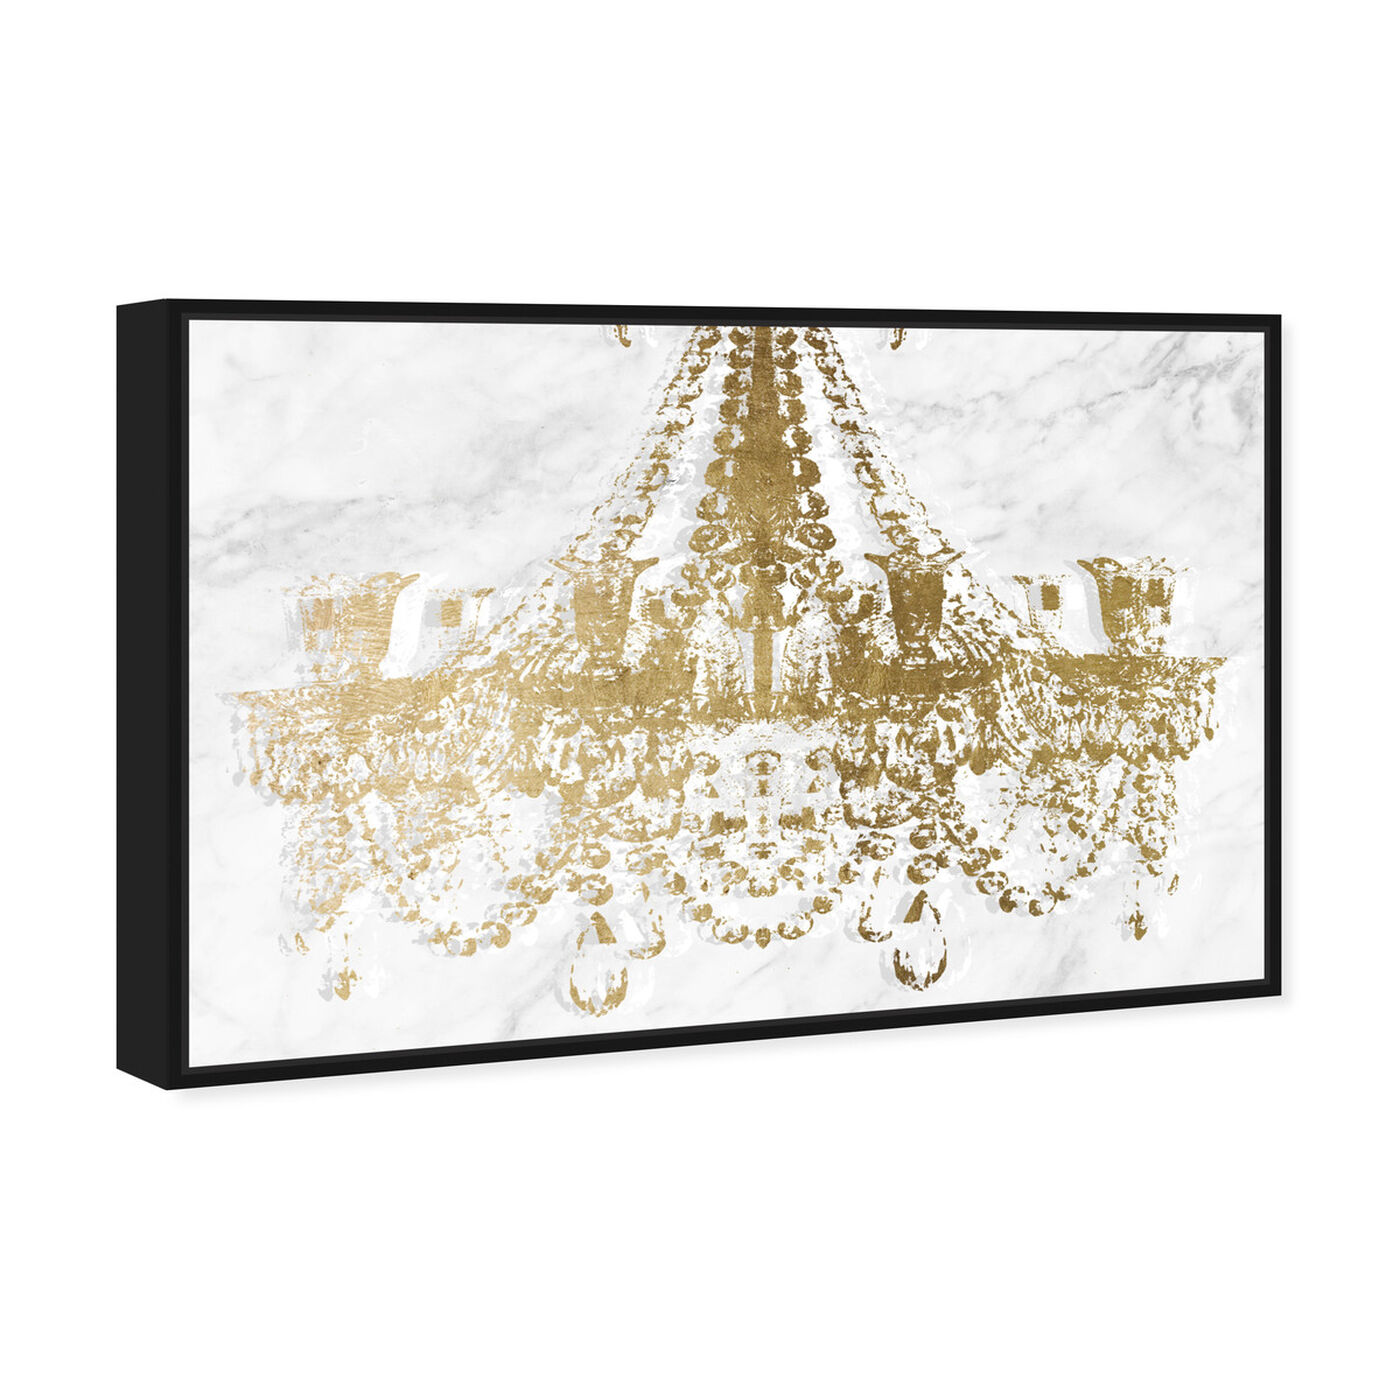 Angled view of Dramatic Entrance Marble and Gold featuring fashion and glam and chandeliers art.